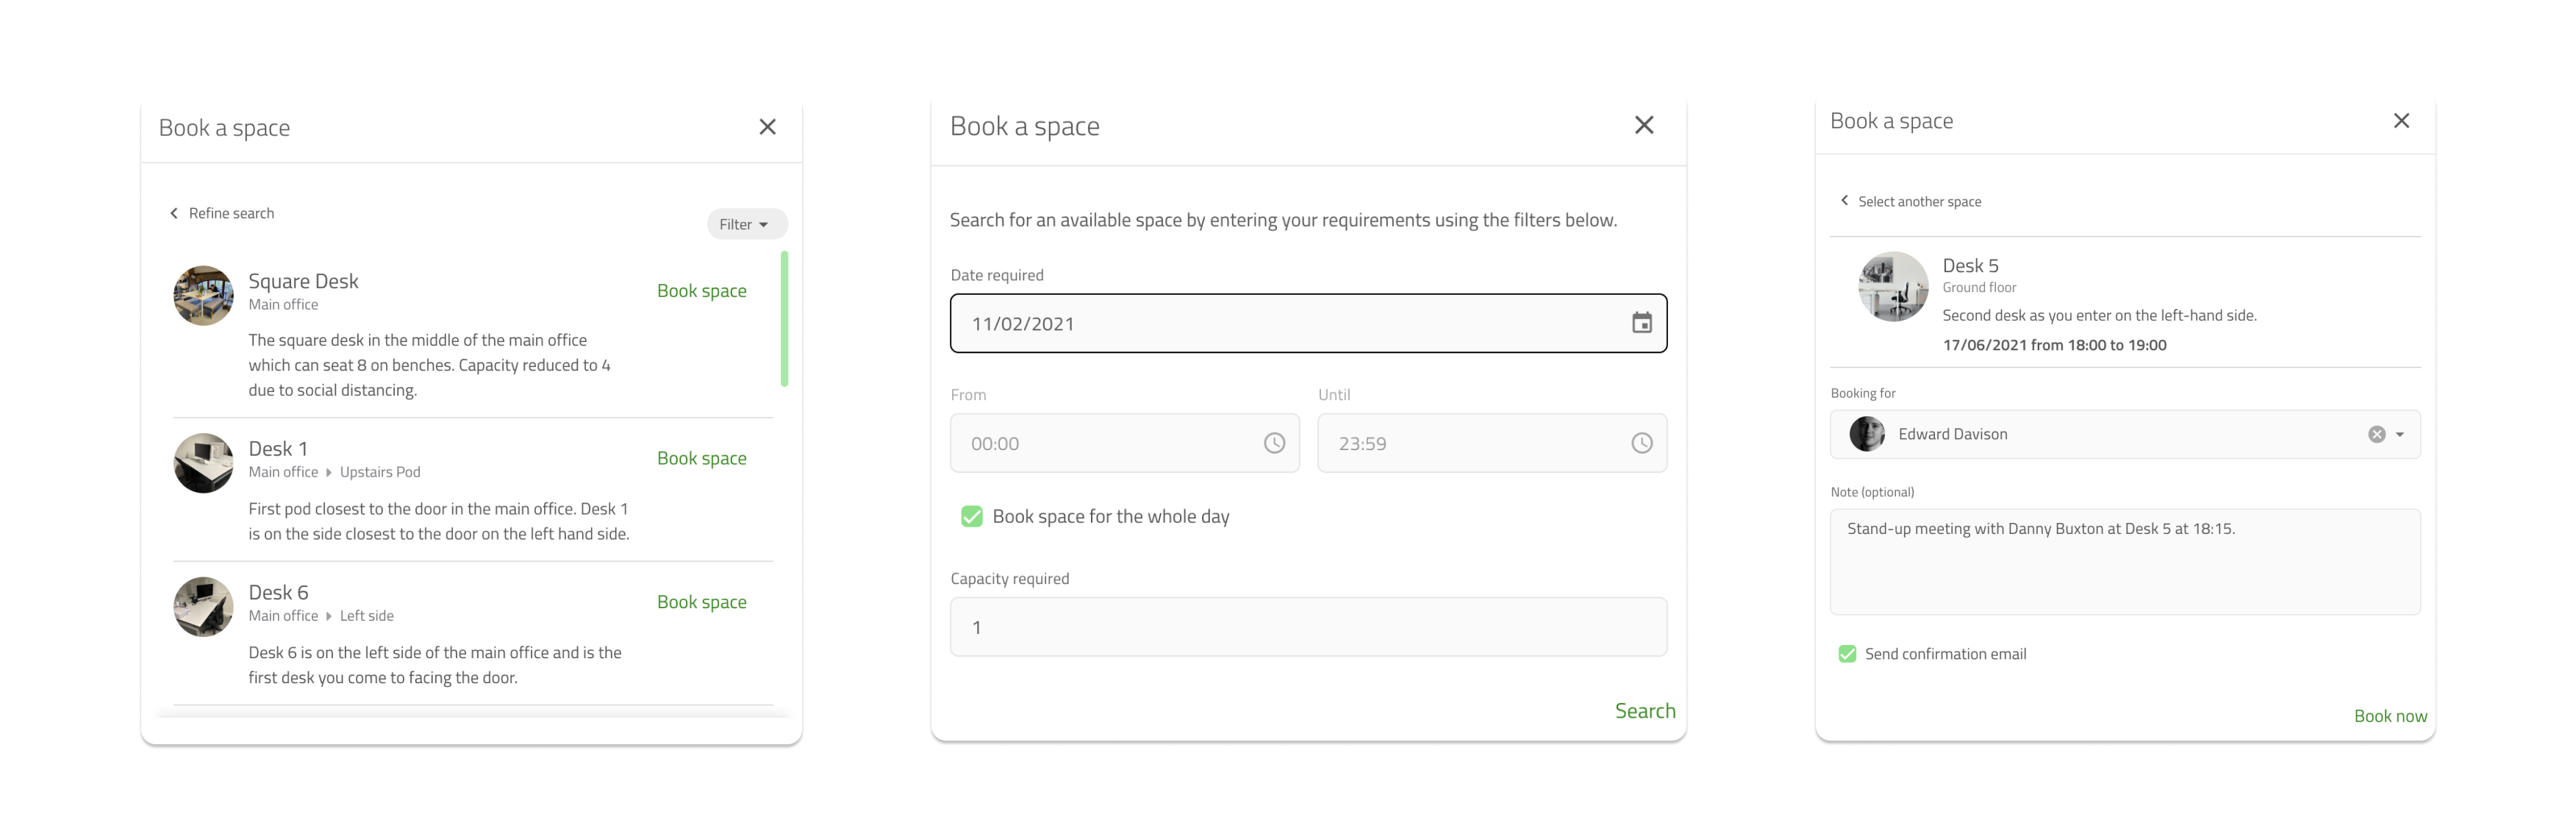 Screenshots showing the booking process from the Spaces section of the portal